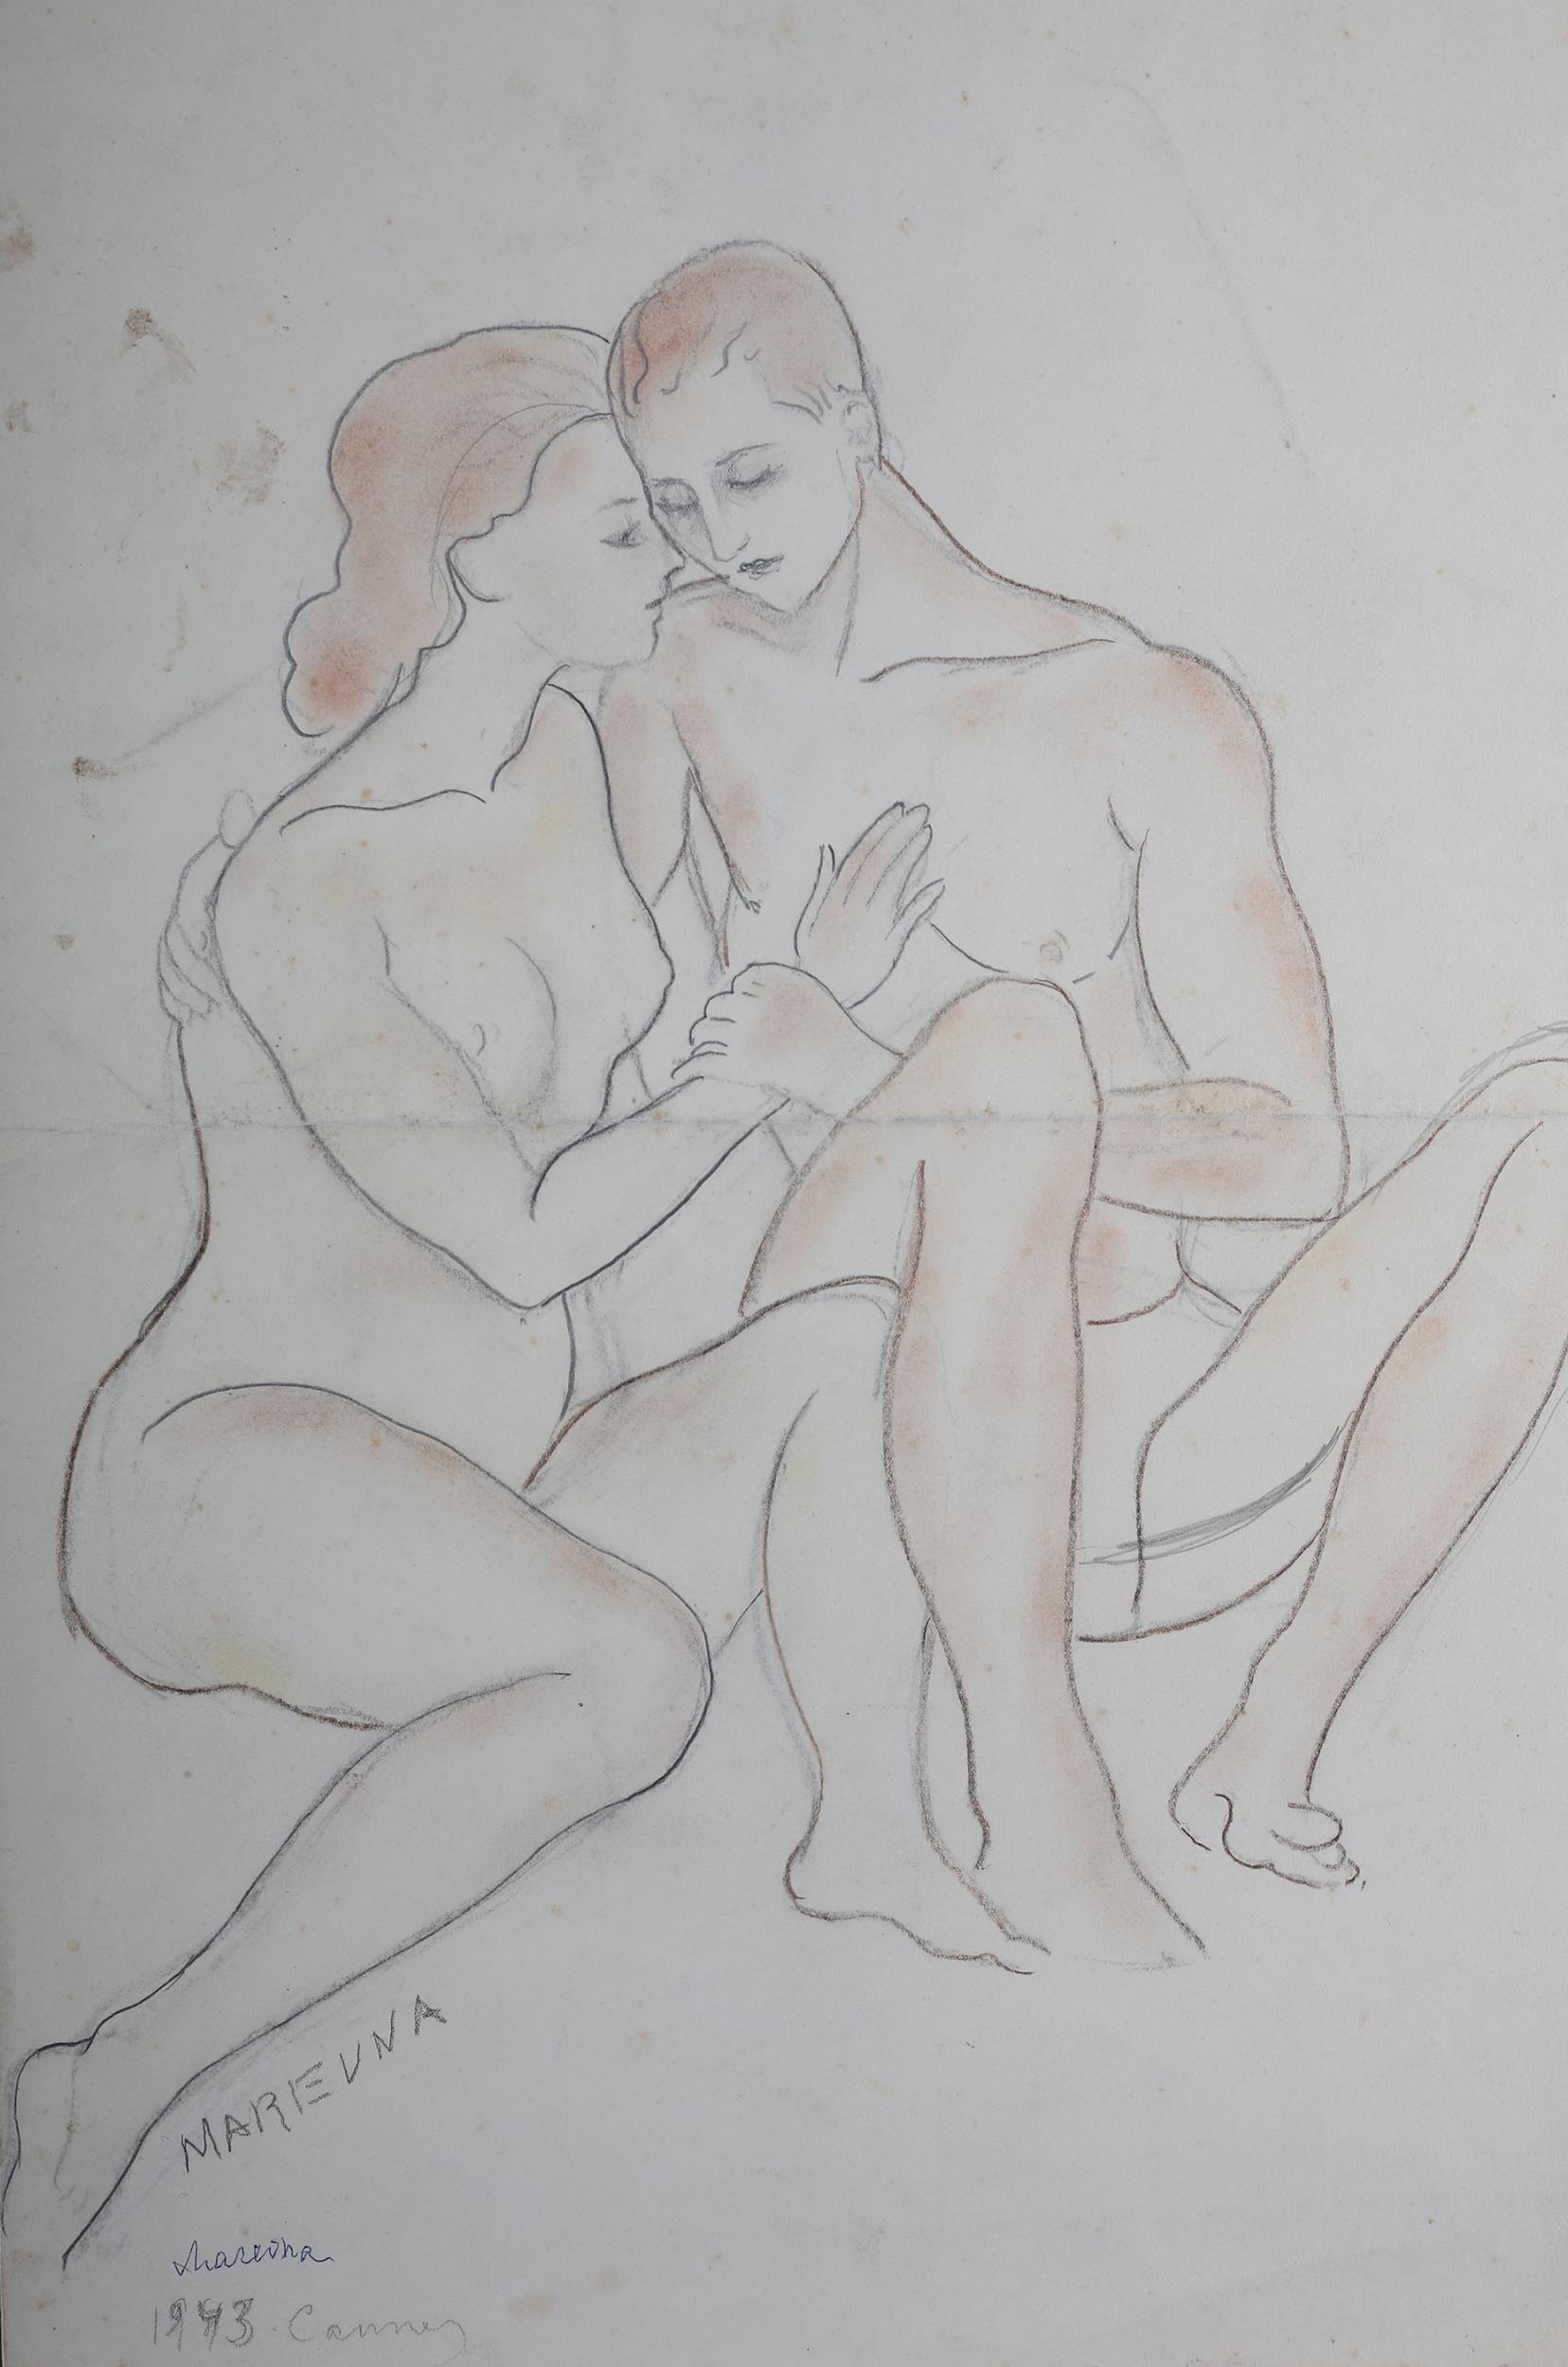 Marevna - Marie Vorobieff Marvena (Russian 1892-1984), Nude male and female embracing, pencil and